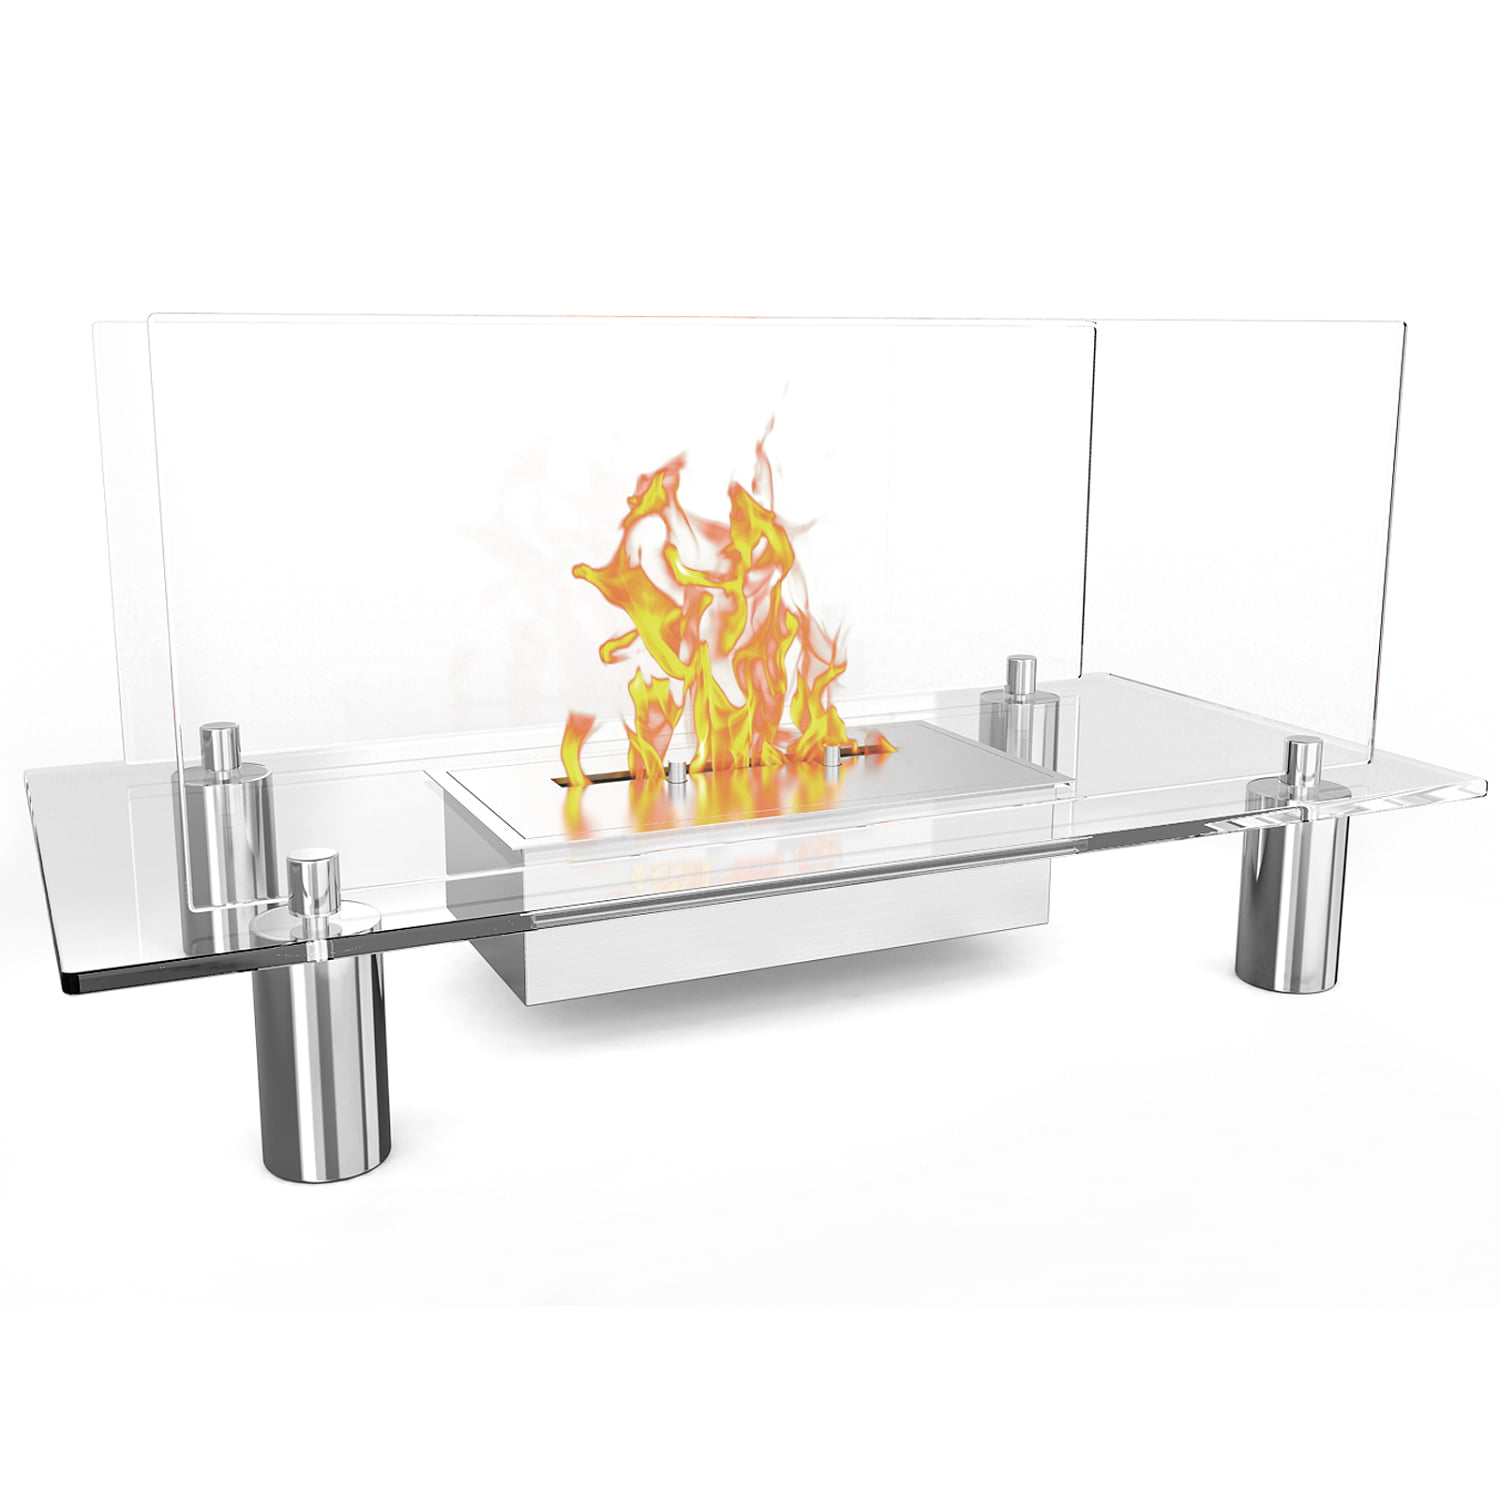 Regal Flame Delano Ventless Free Standing Bio Ethanol Fireplace Can Be Used as a Indoor, Outdoor, Gas Log Inserts, Vent Free, El